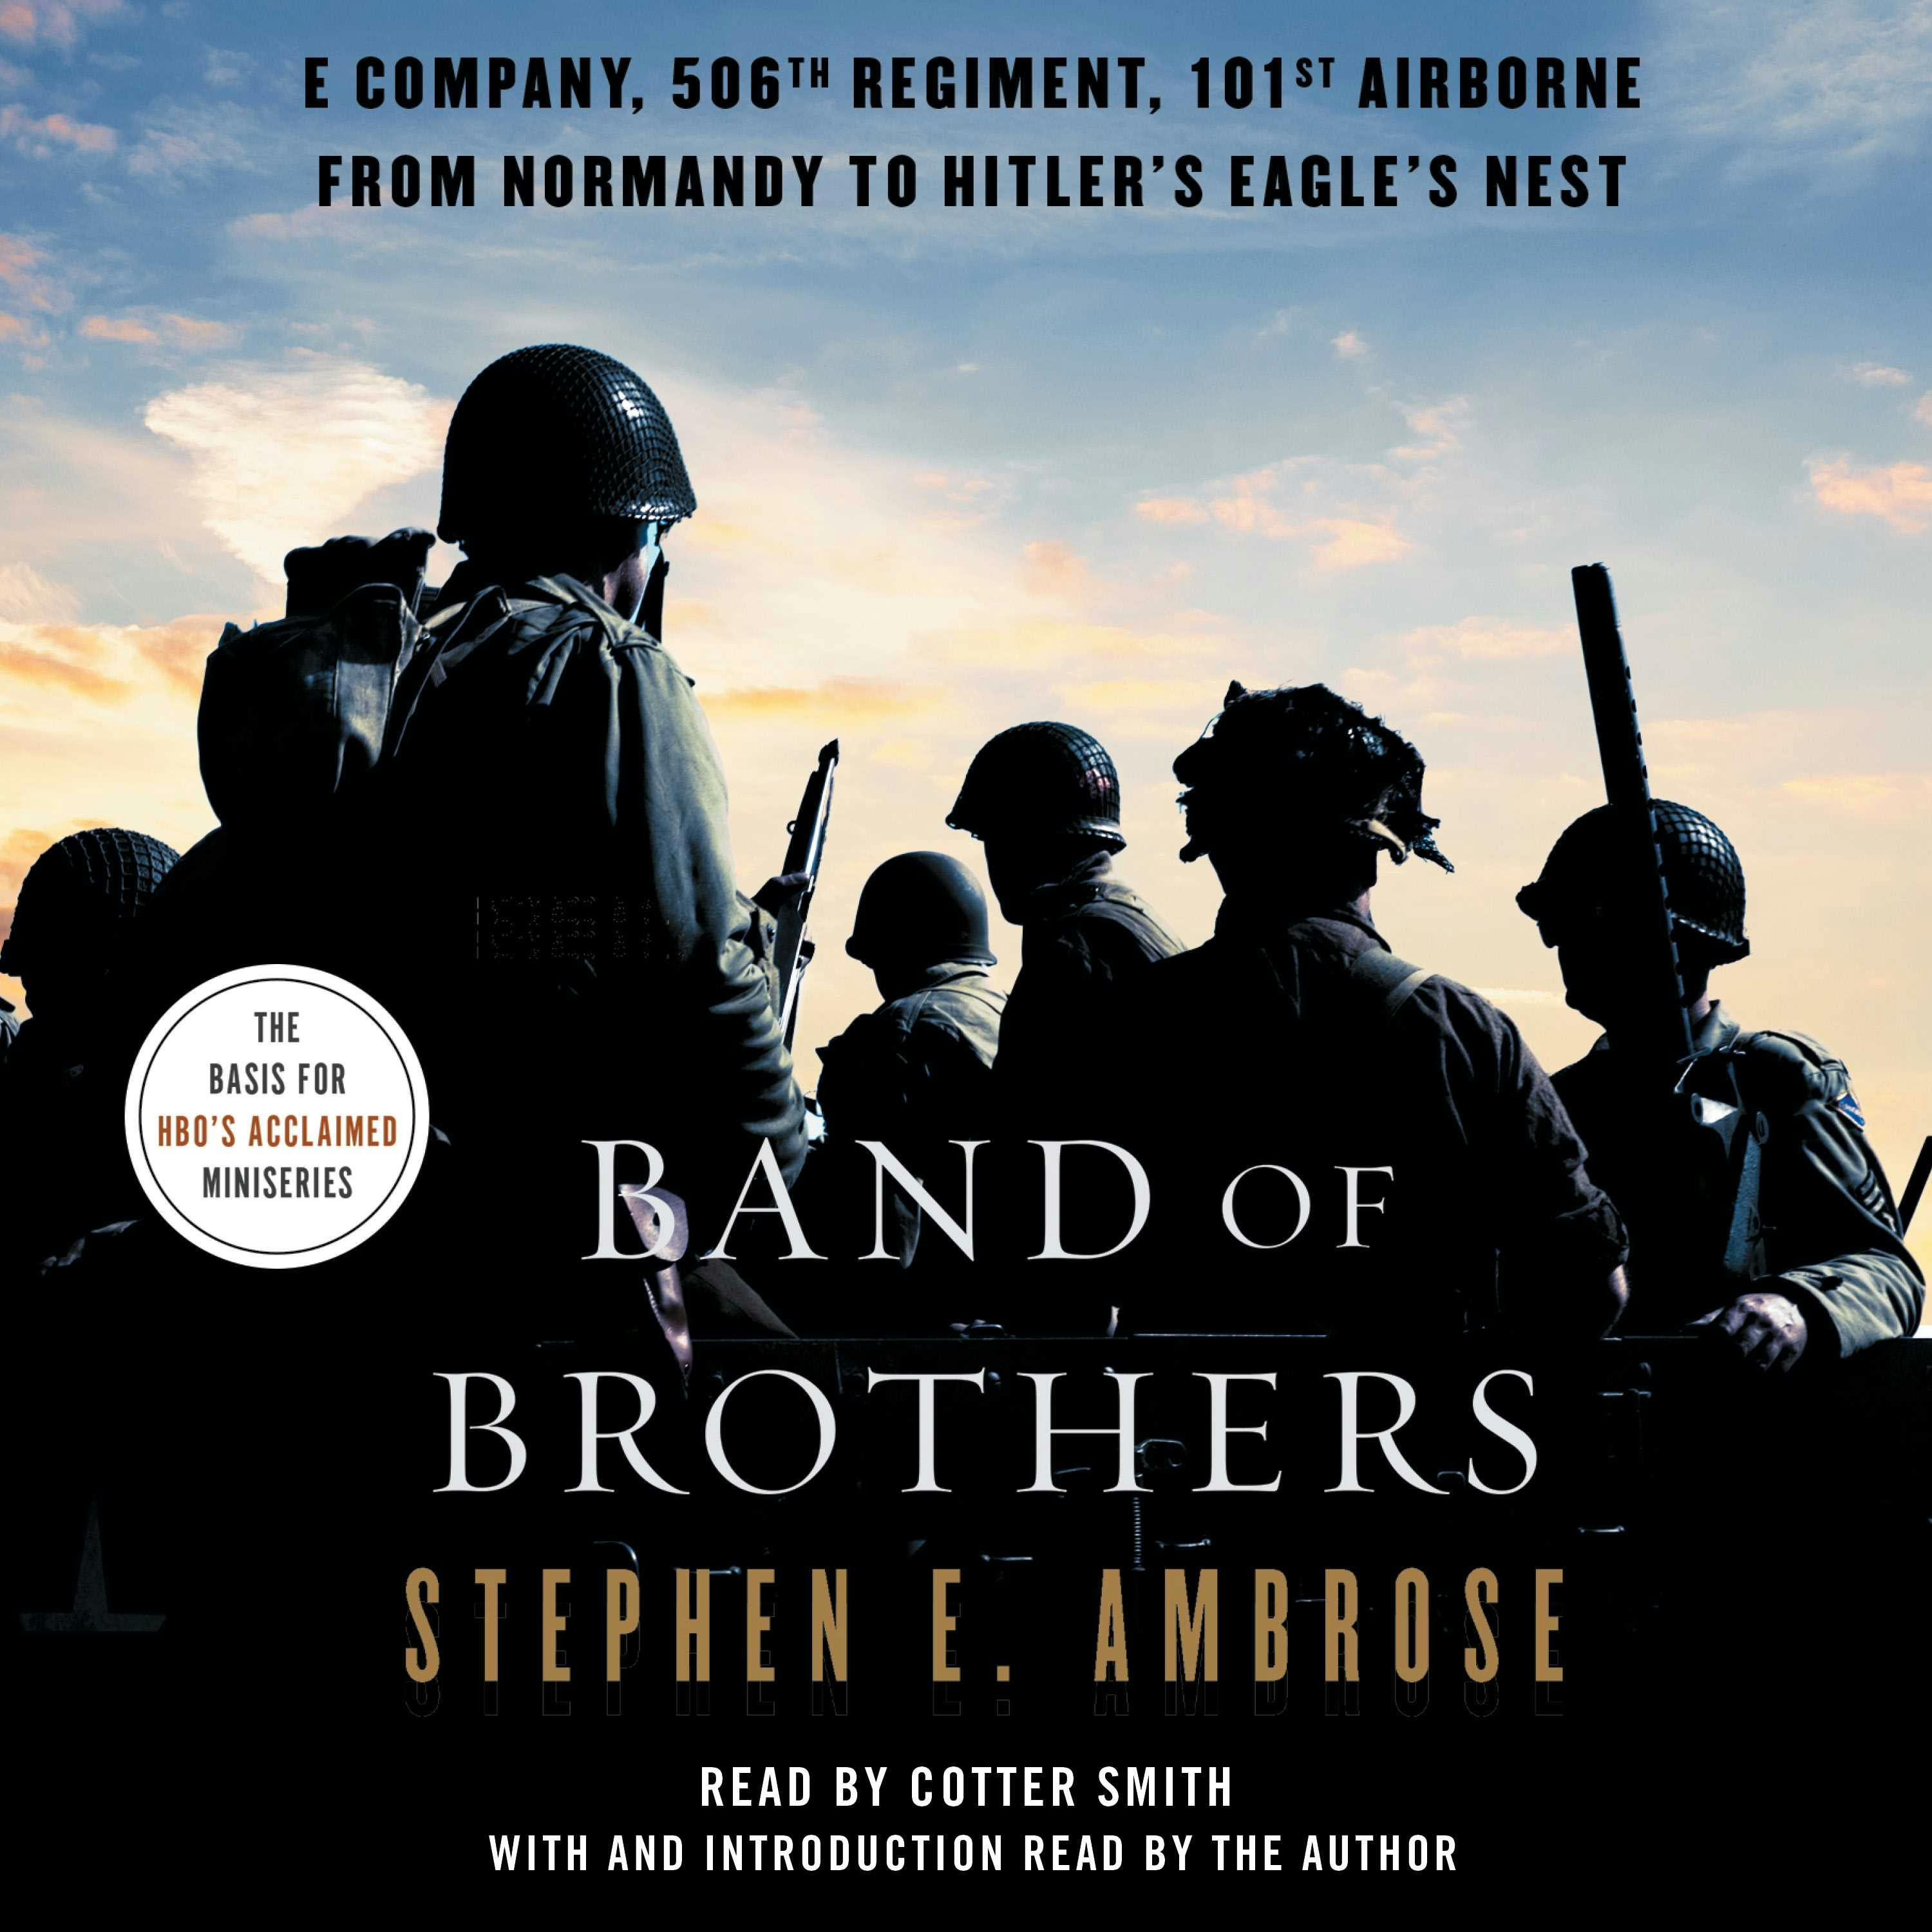 Band of Brothers: E Company, 506th Regiment, 101st Airborne, from Normandy to Hitler's Eagle's Nest - Stephen E. Ambrose